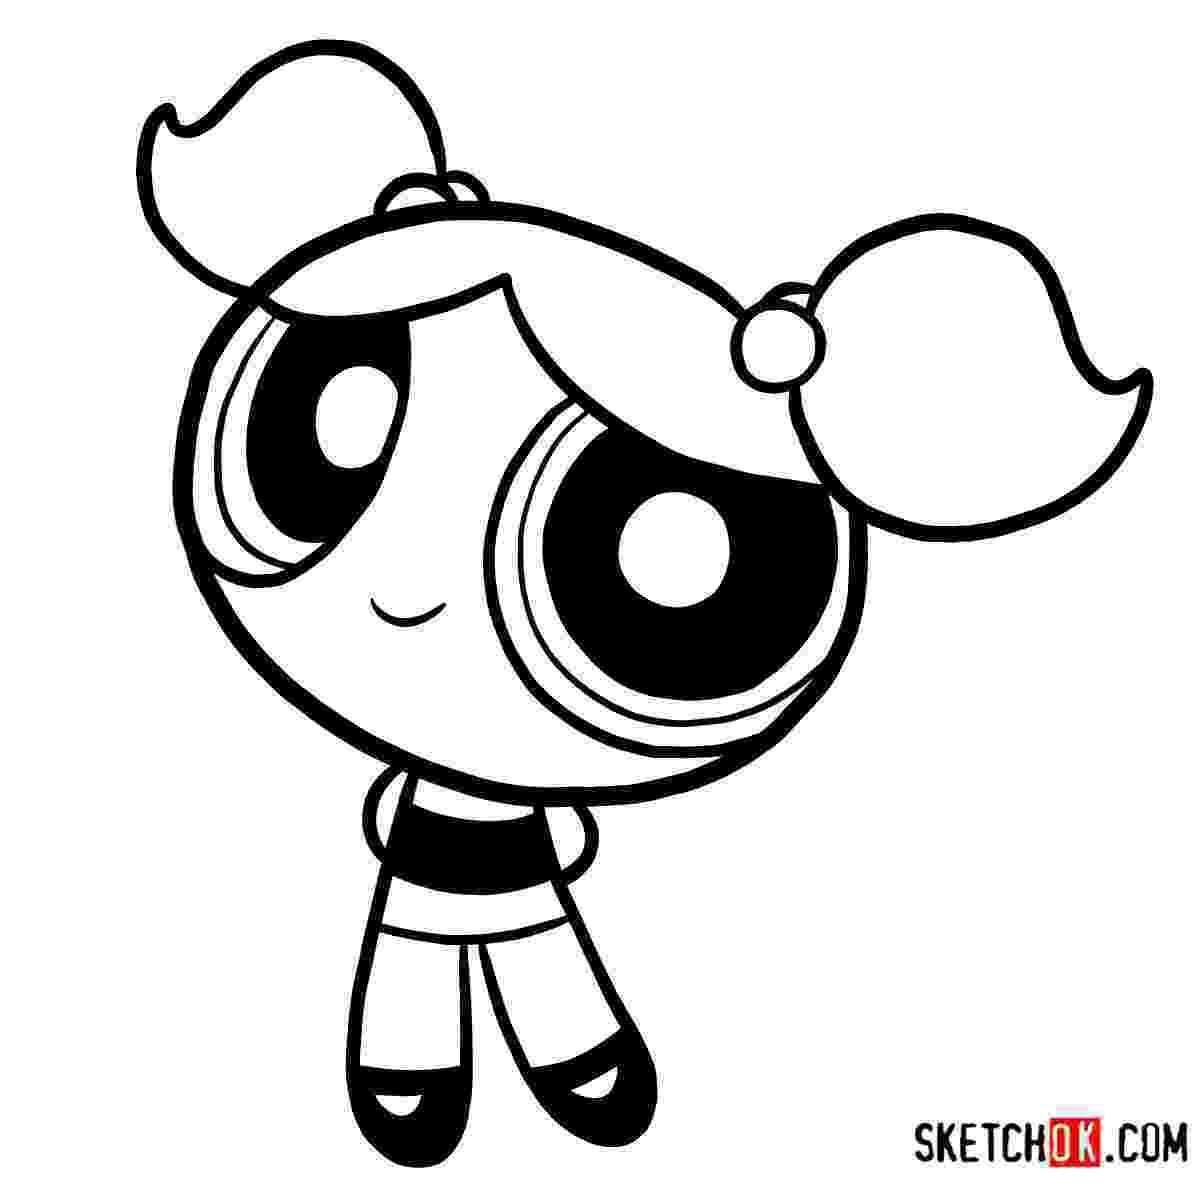 powerpuff girl pictures 39the powerpuff girls39 printable coloring pages hubpages powerpuff pictures girl 